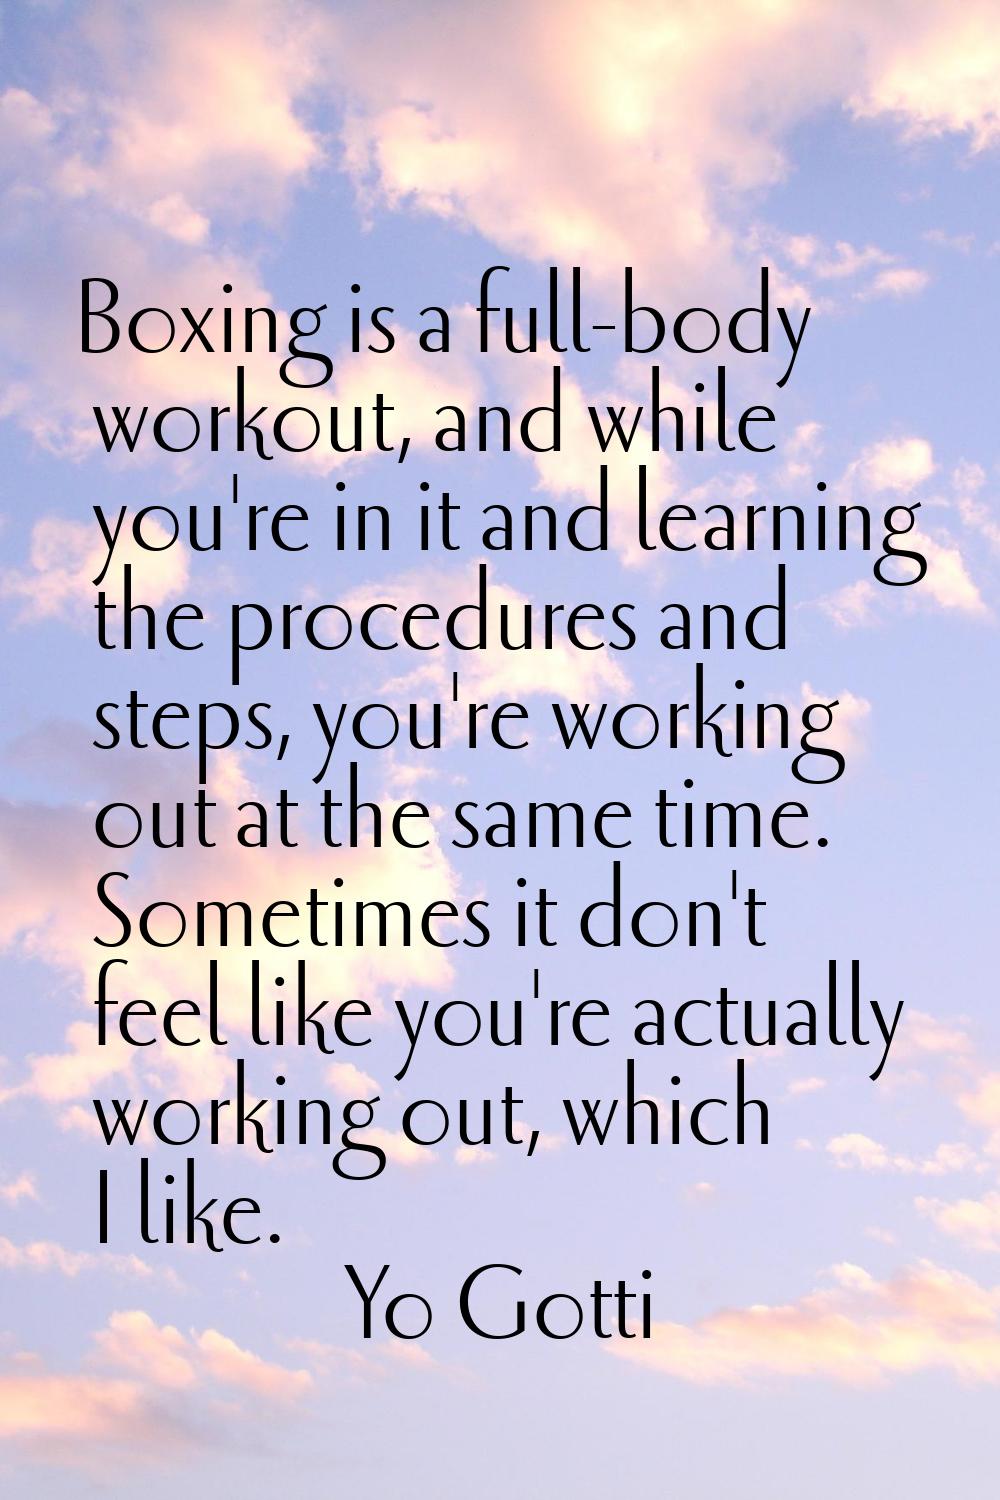 Boxing is a full-body workout, and while you're in it and learning the procedures and steps, you're